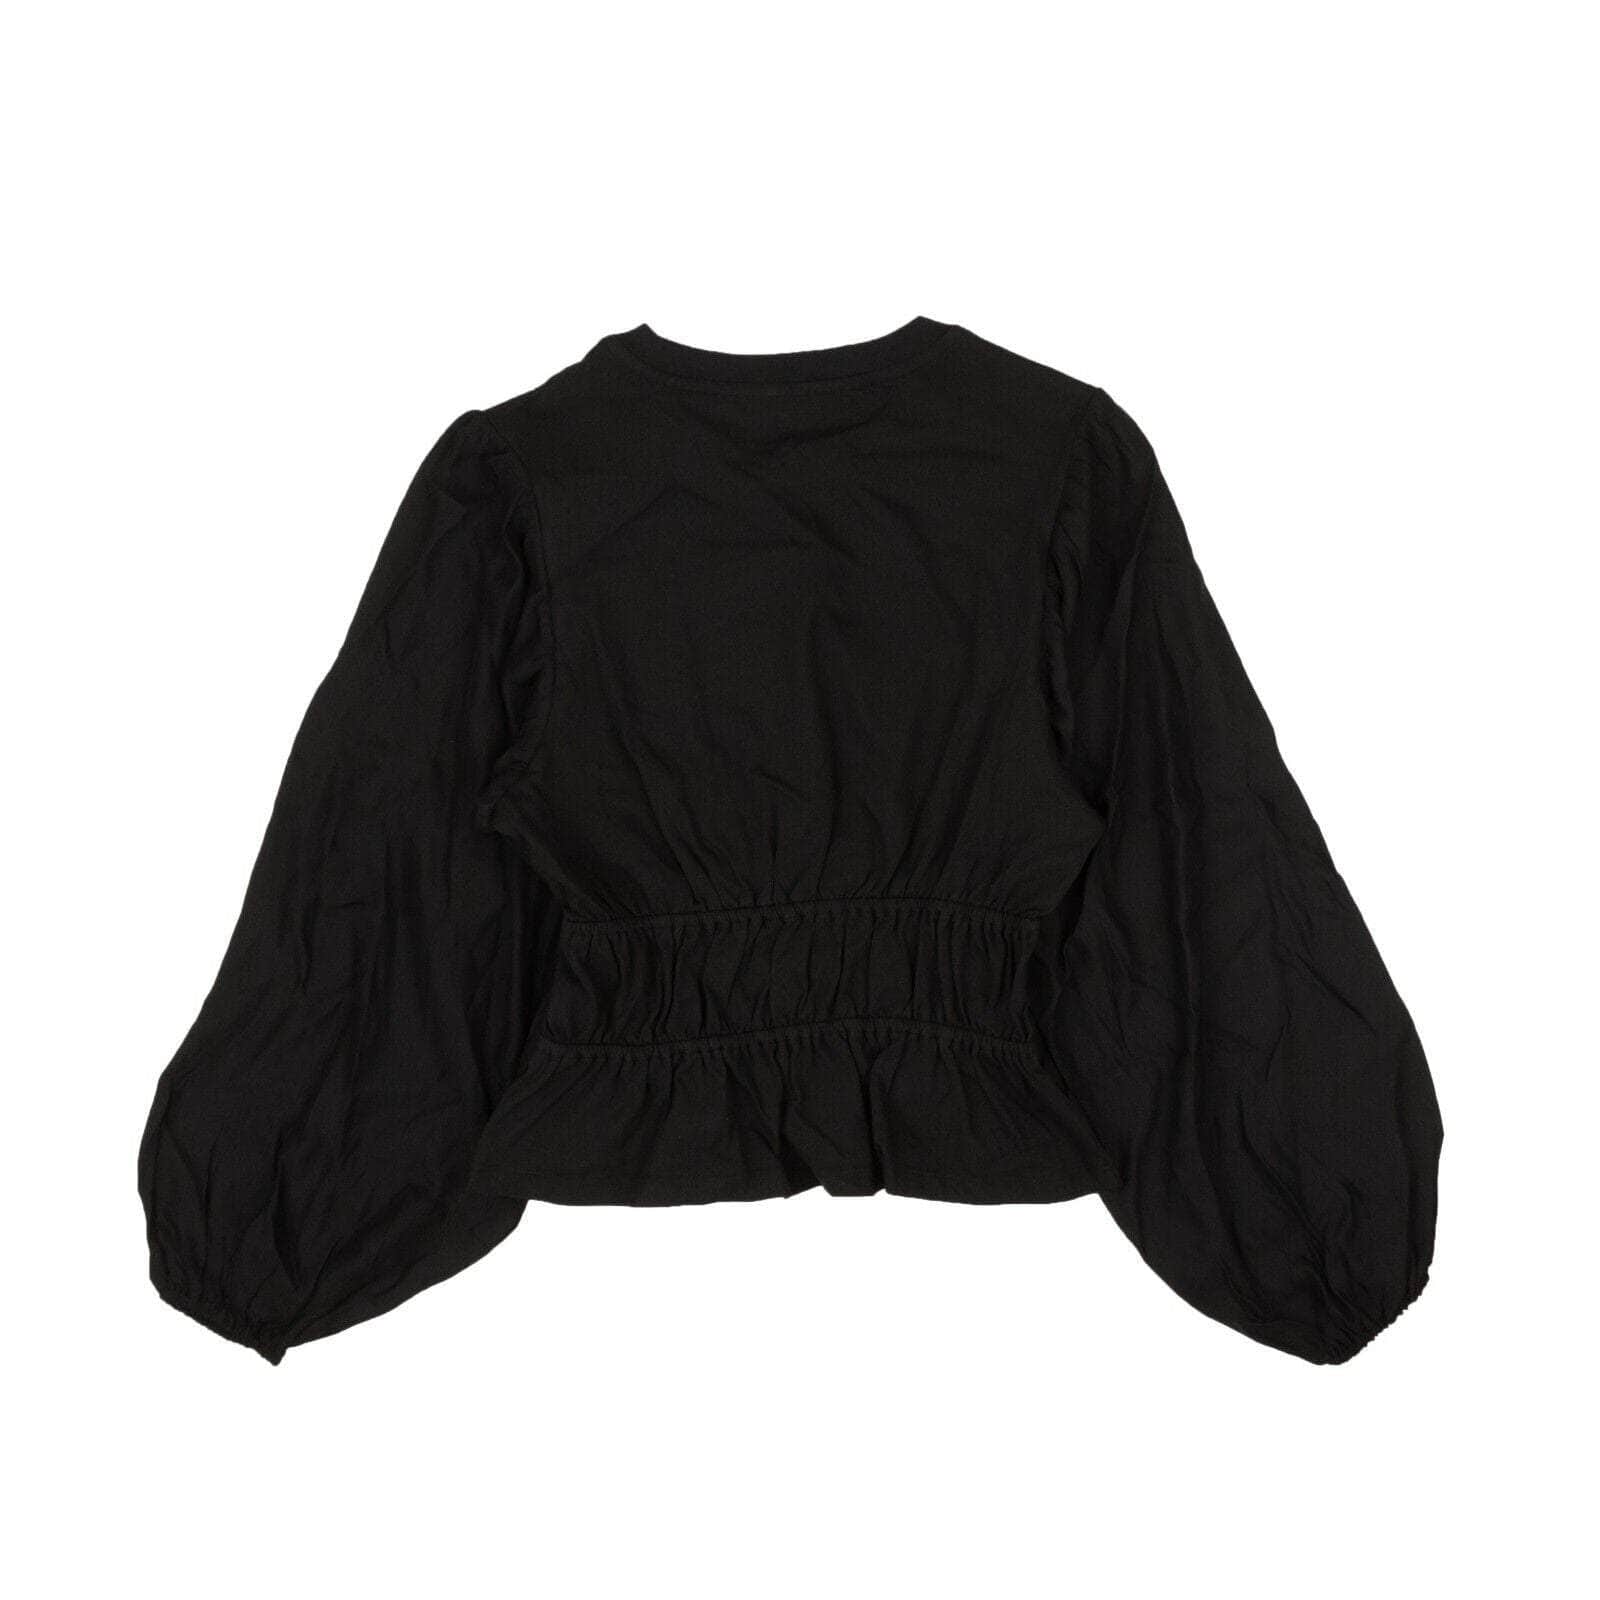 Opening Ceremony channelenable-all, chicmi, couponcollection, gender-womens, main-clothing XS Black Silk Long Sleeve Blouse Top 95-OCY-1047/XS 95-OCY-1047/XS